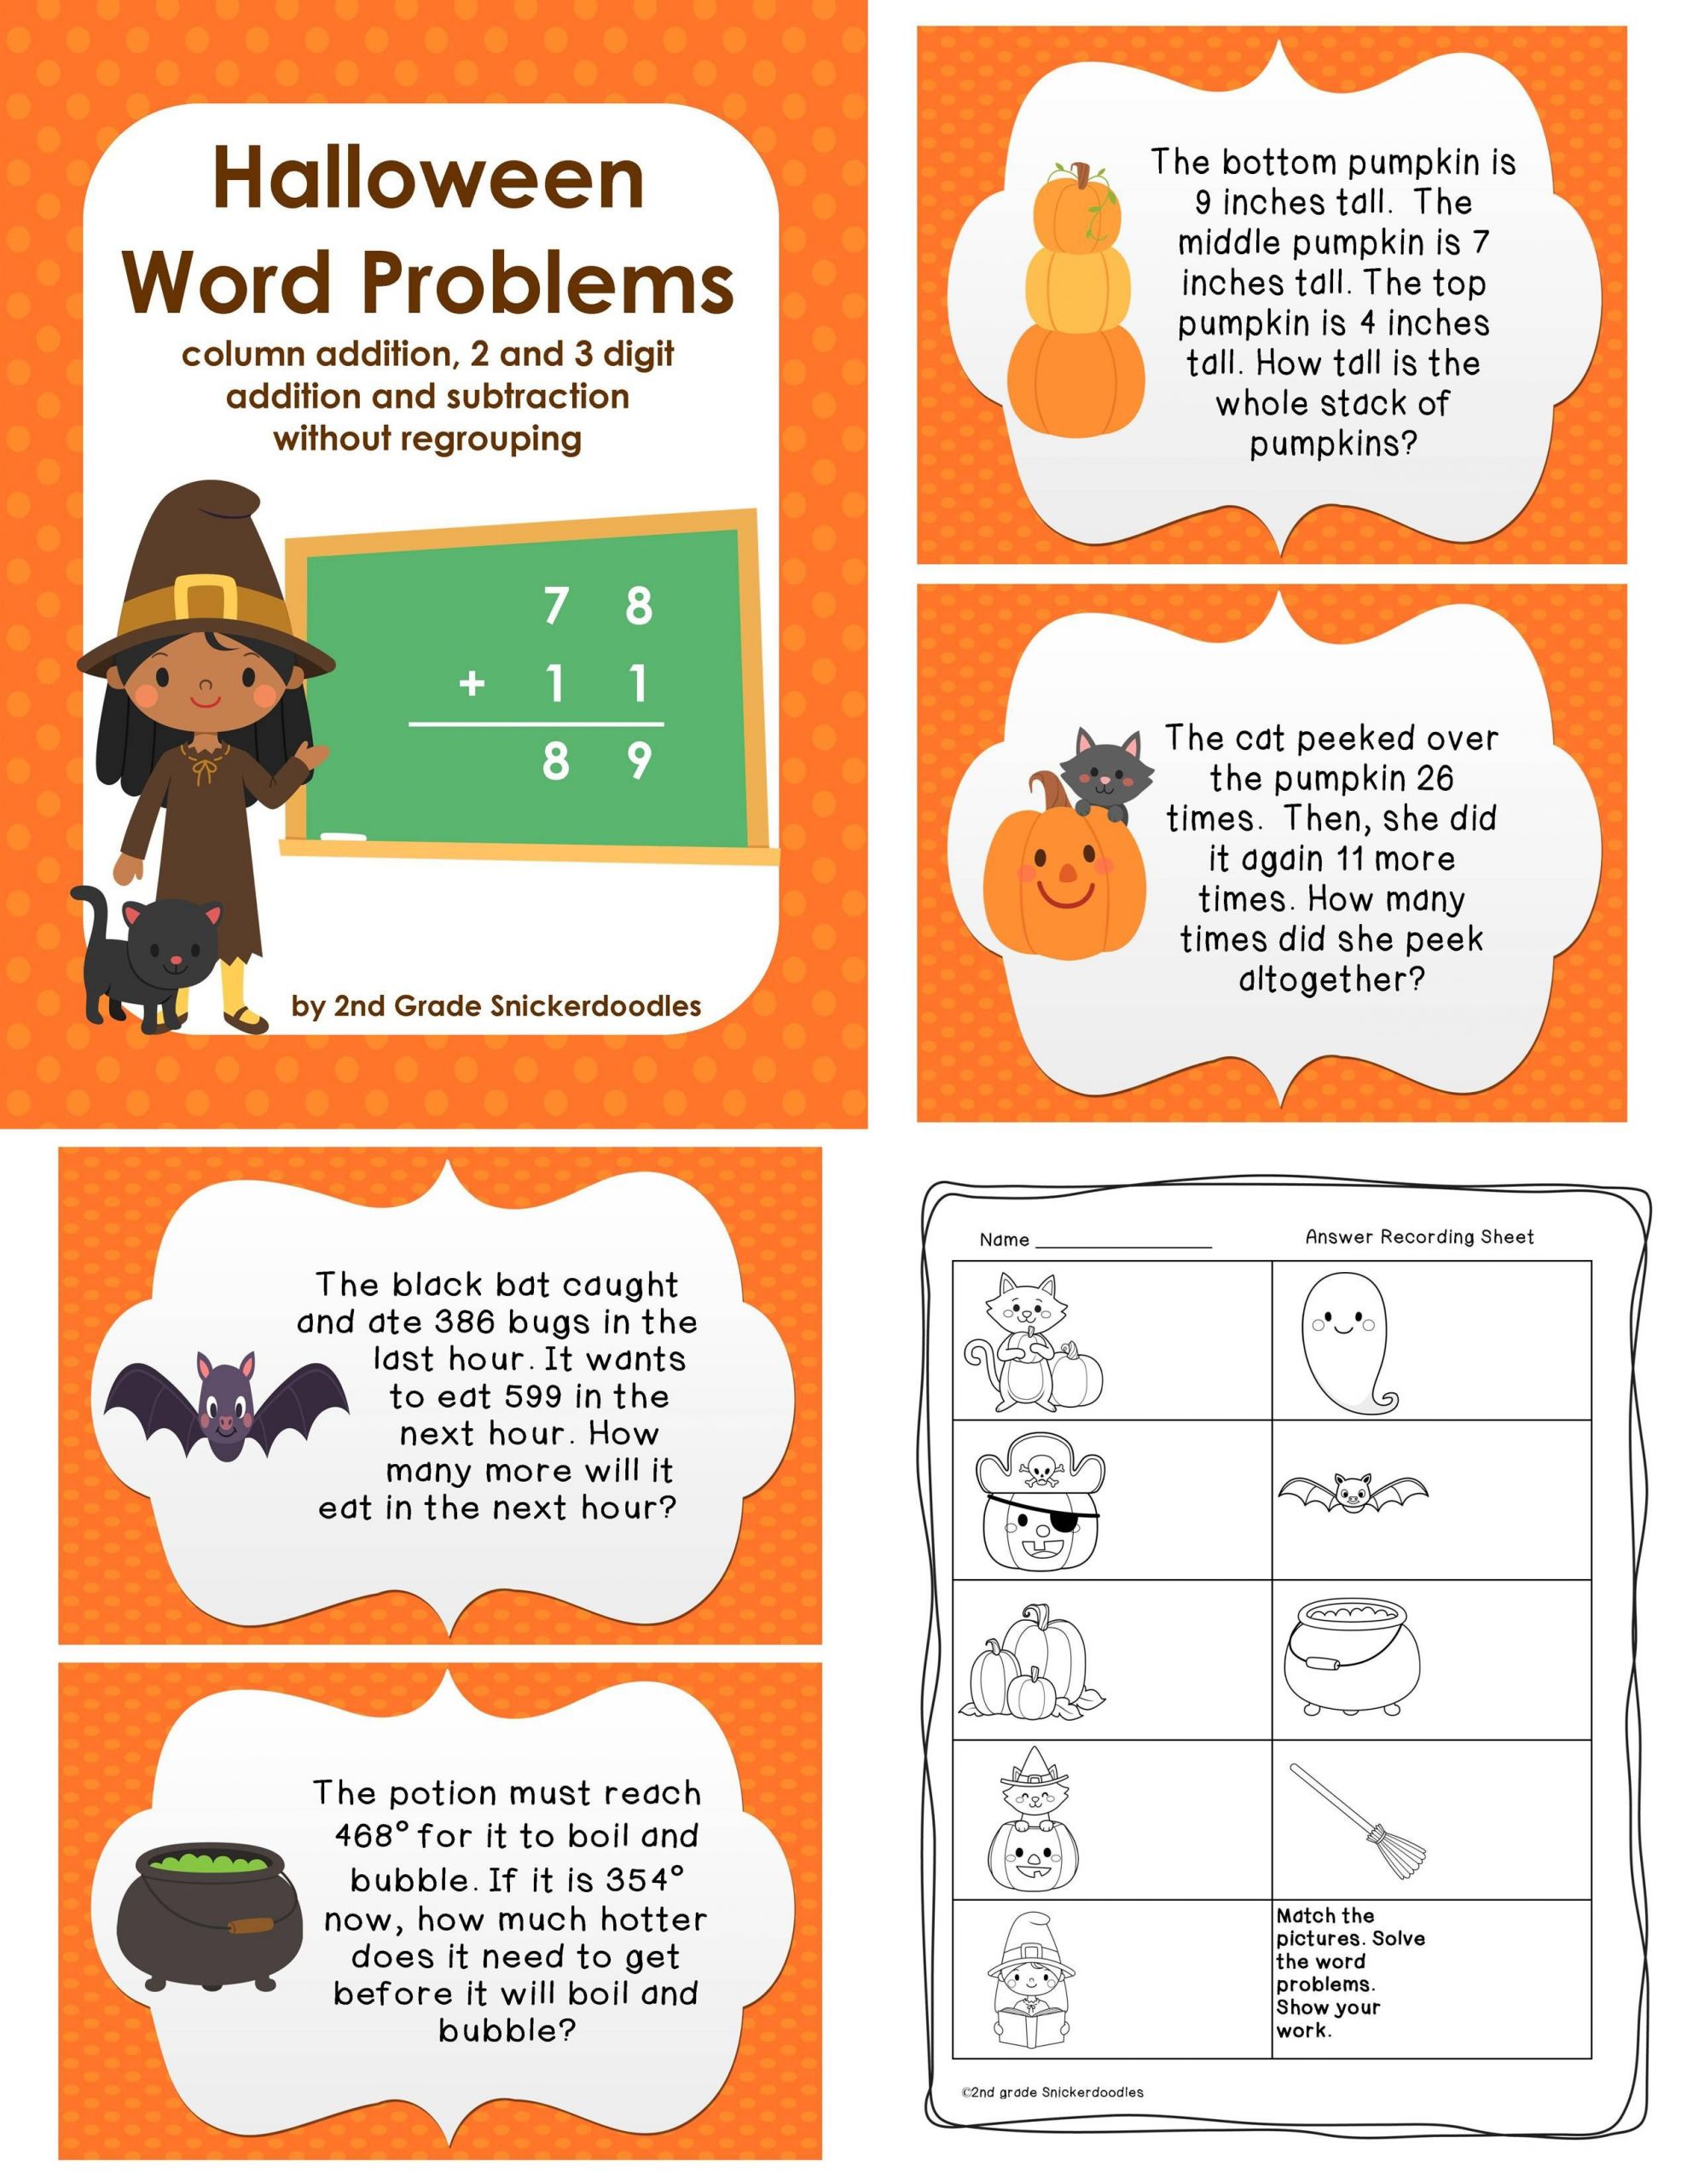 full halloween word problems addition and subtraction without regrouping